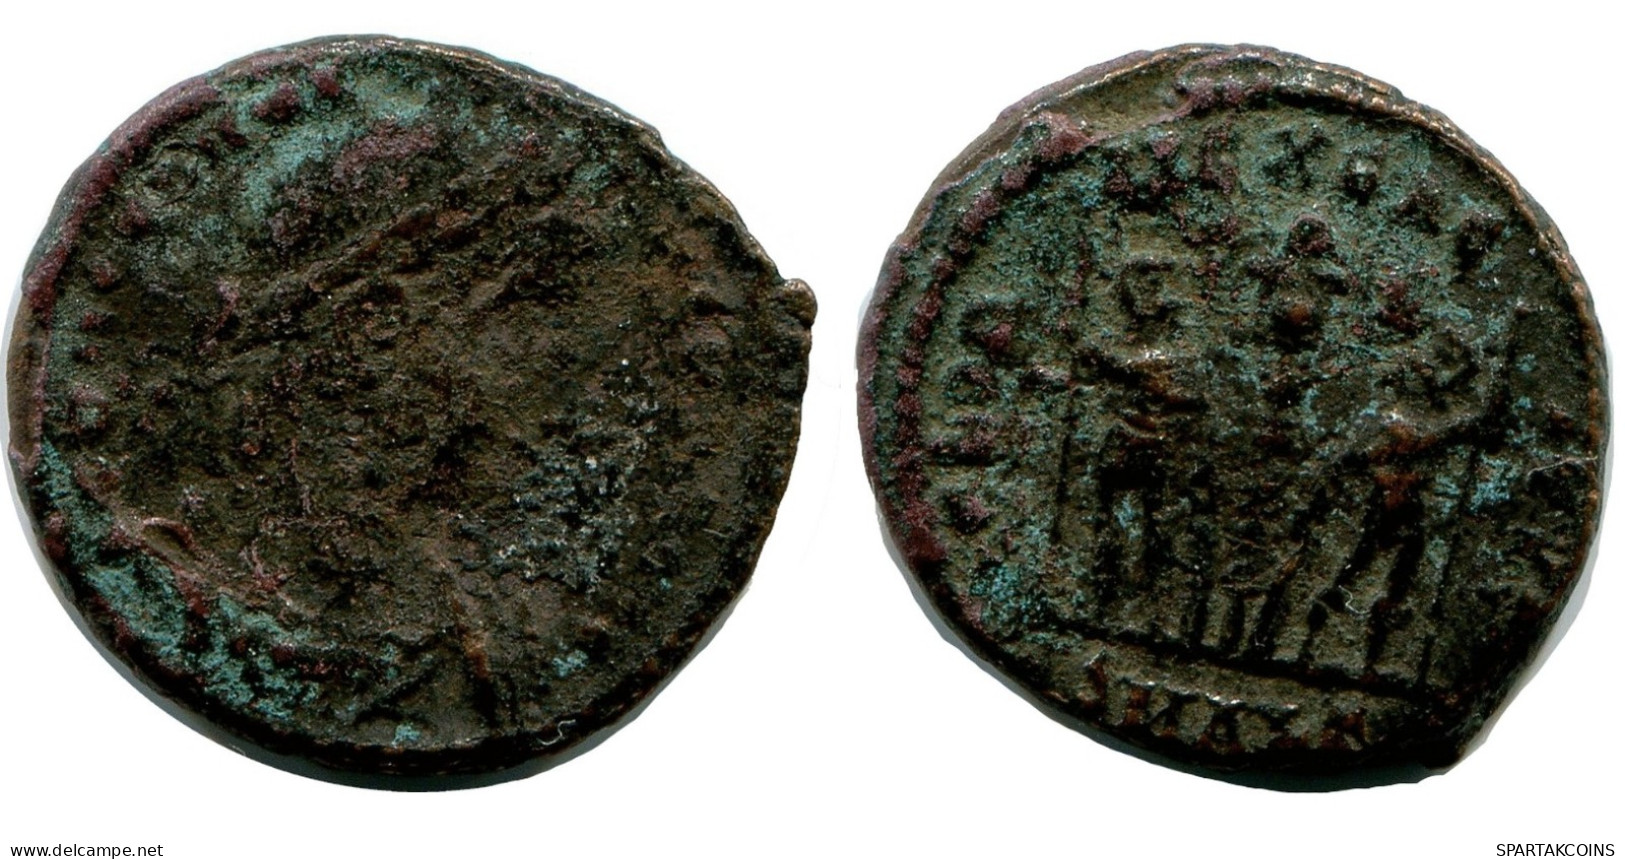 ROMAN Coin MINTED IN ALEKSANDRIA FROM THE ROYAL ONTARIO MUSEUM #ANC10173.14.D.A - The Christian Empire (307 AD To 363 AD)